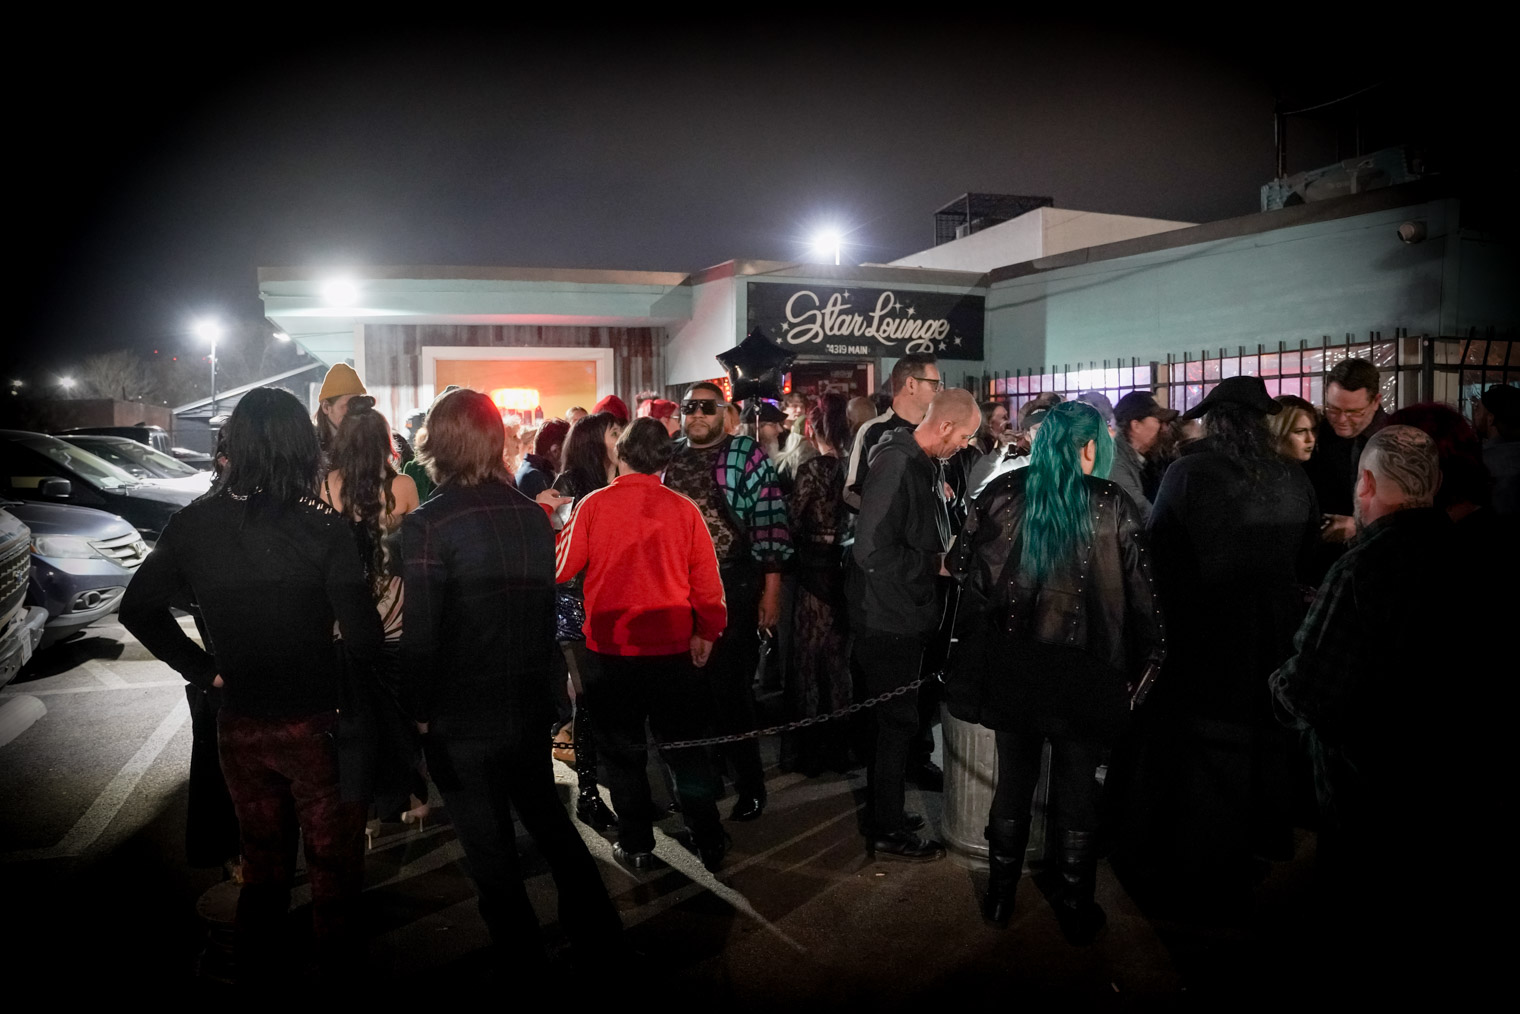 A crowd of people outside a venue